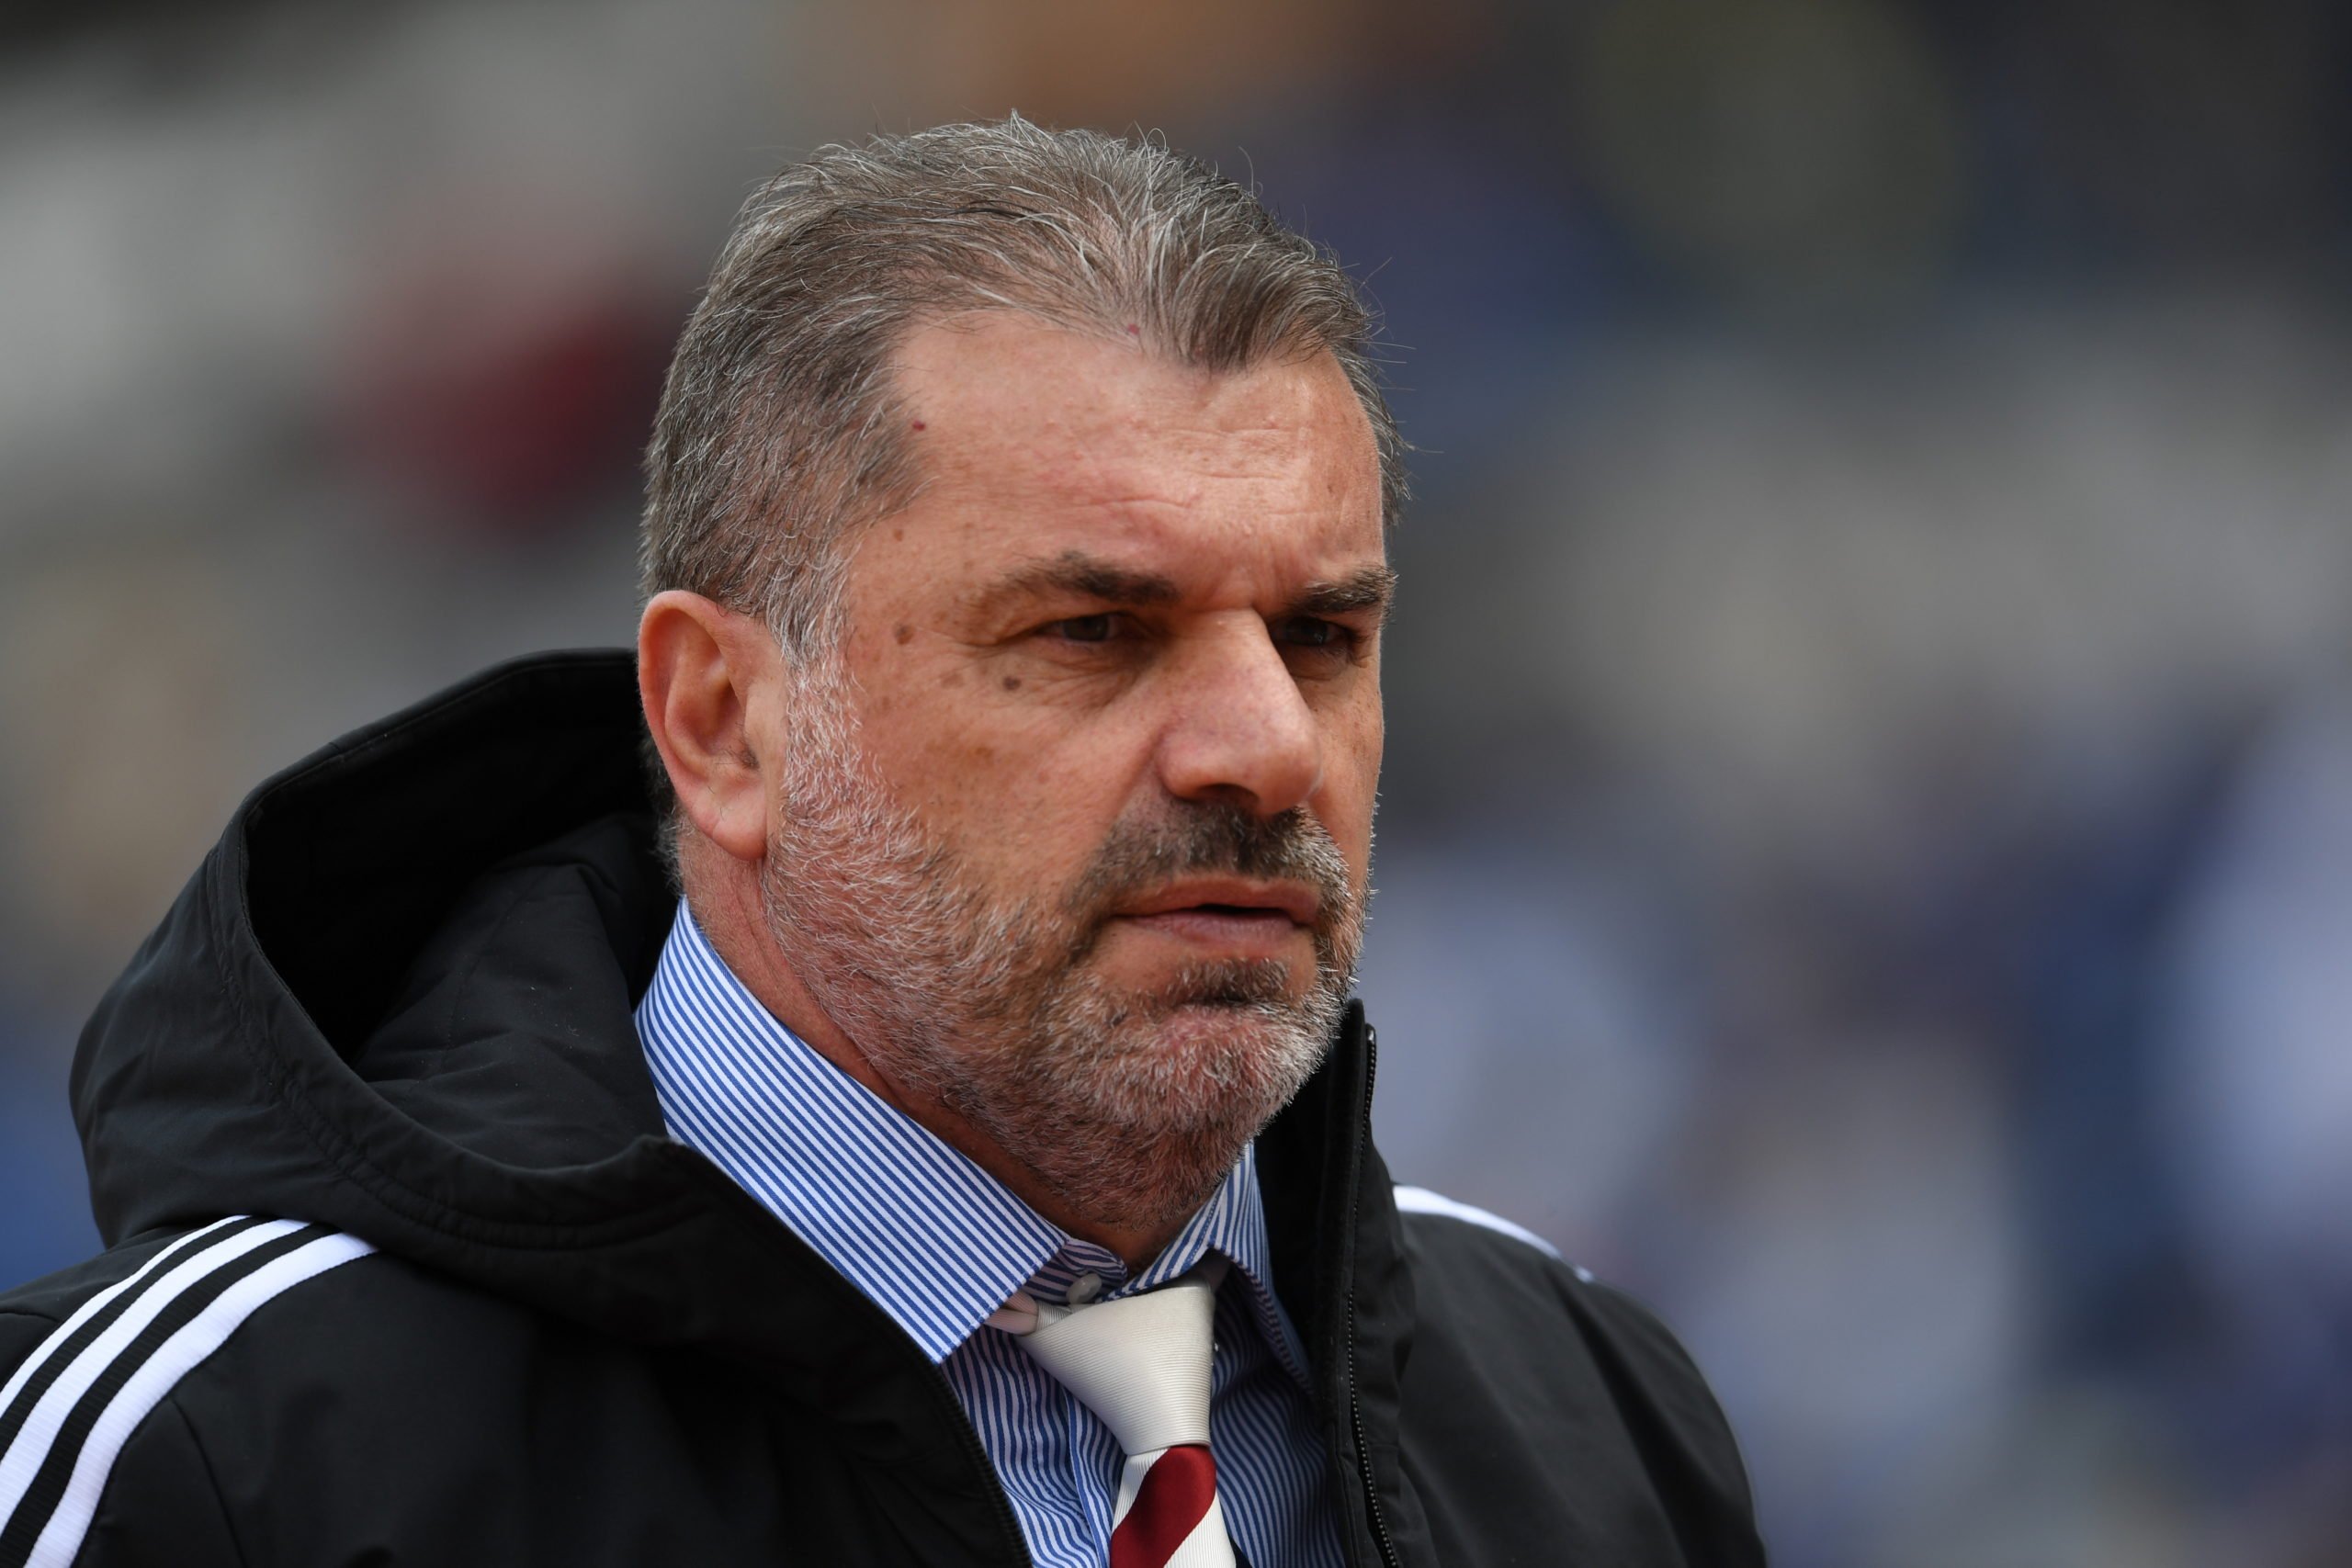 The fundamental question you need to ask yourself about Ange Postecoglou after Celtic staff decision